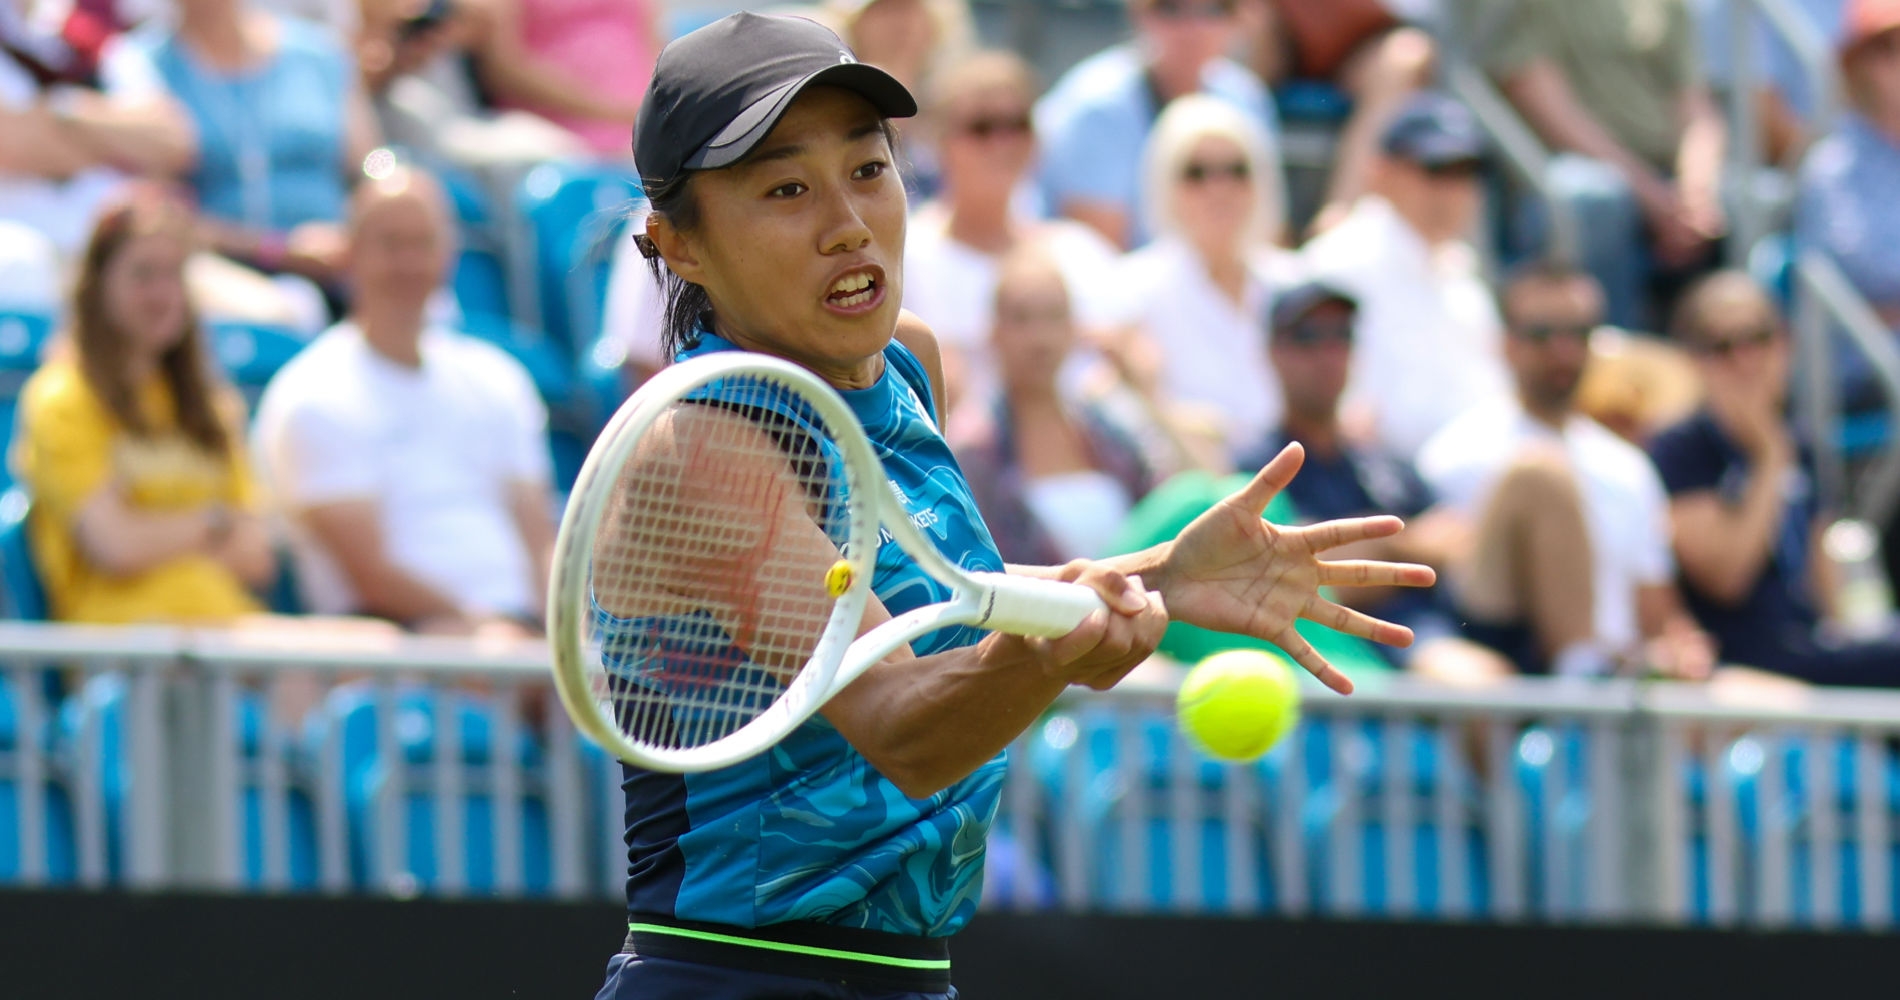 Players support Shuai Zhang after Budapest fiasco - Tennis Majors